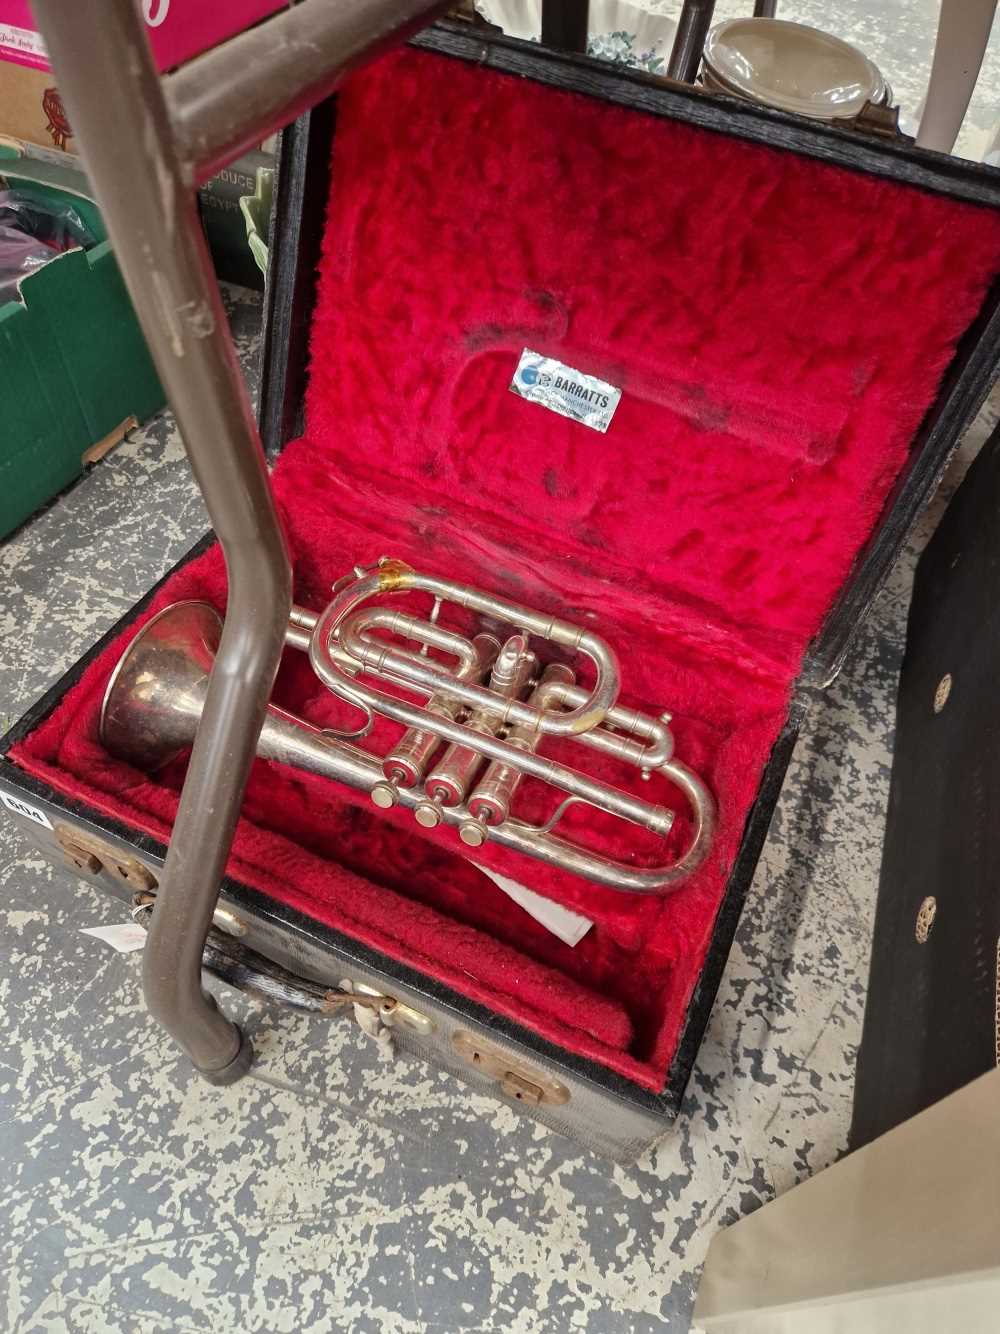 A silver plated cornet.